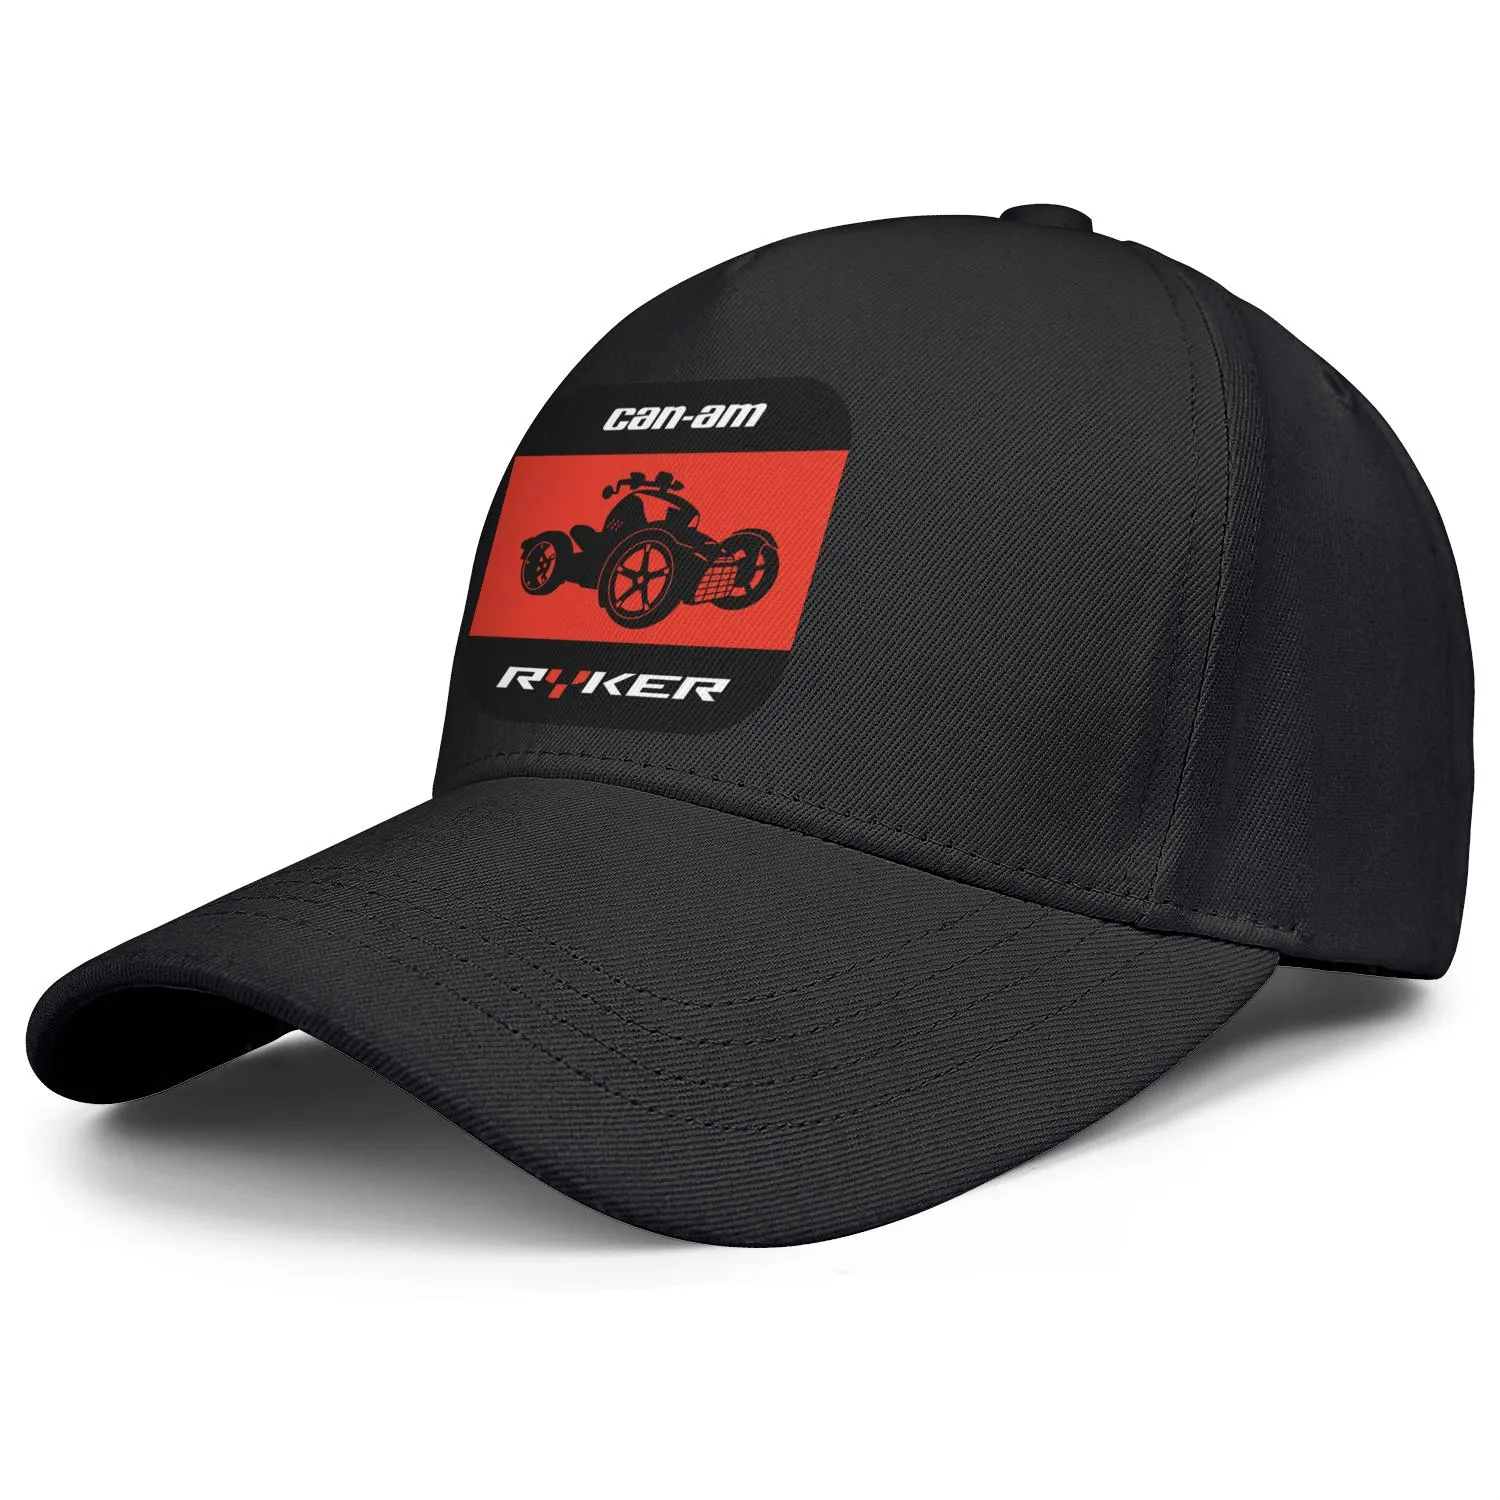 Canam team for men and women adjustable trucker cap cool blank unique baseballhats motor CanAm3977130